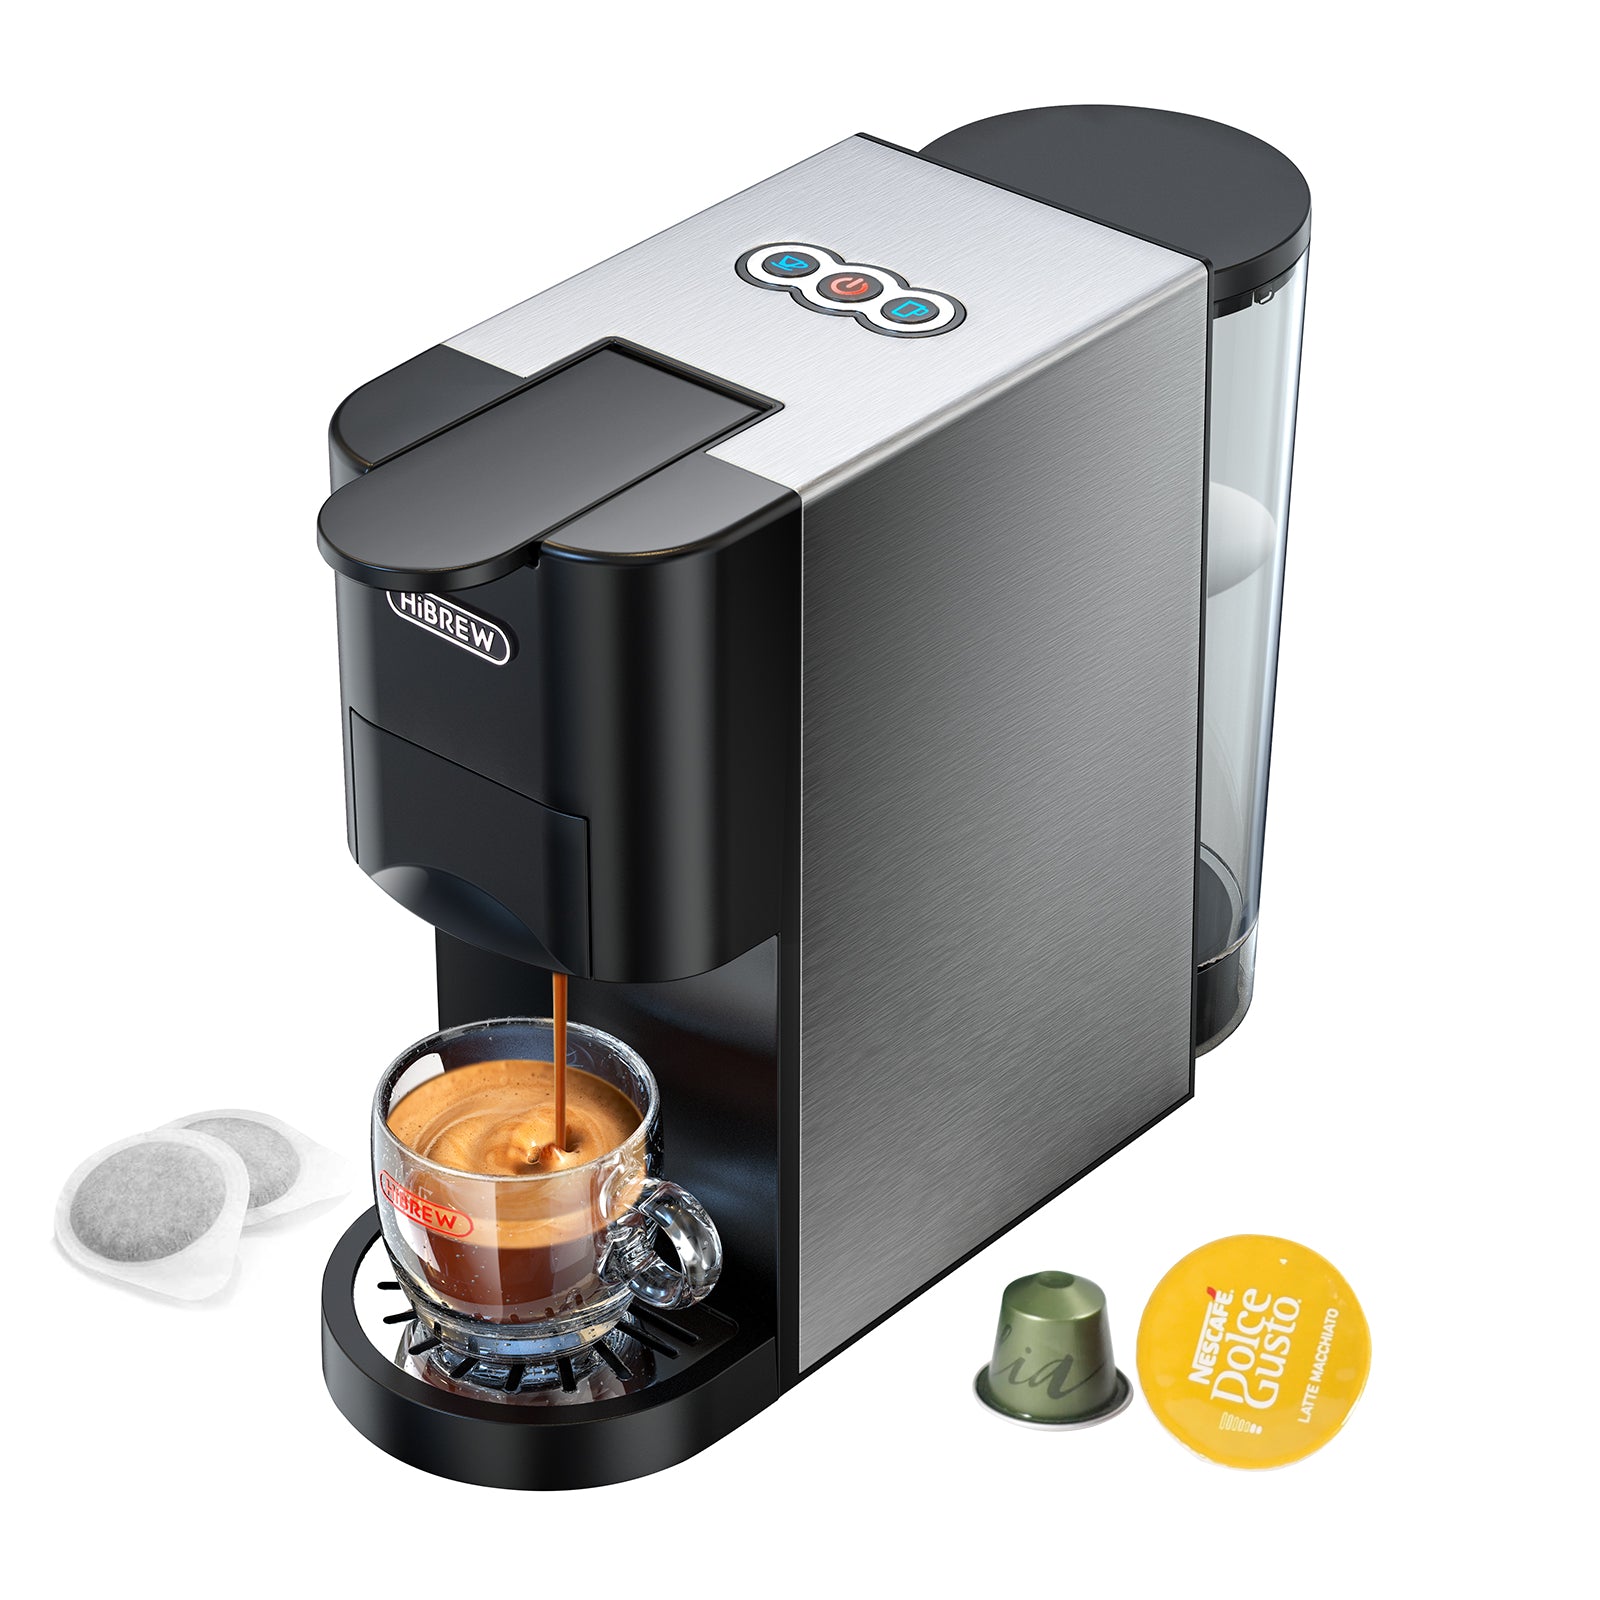 HiBREW Coffee Maker Cafetera – boggy